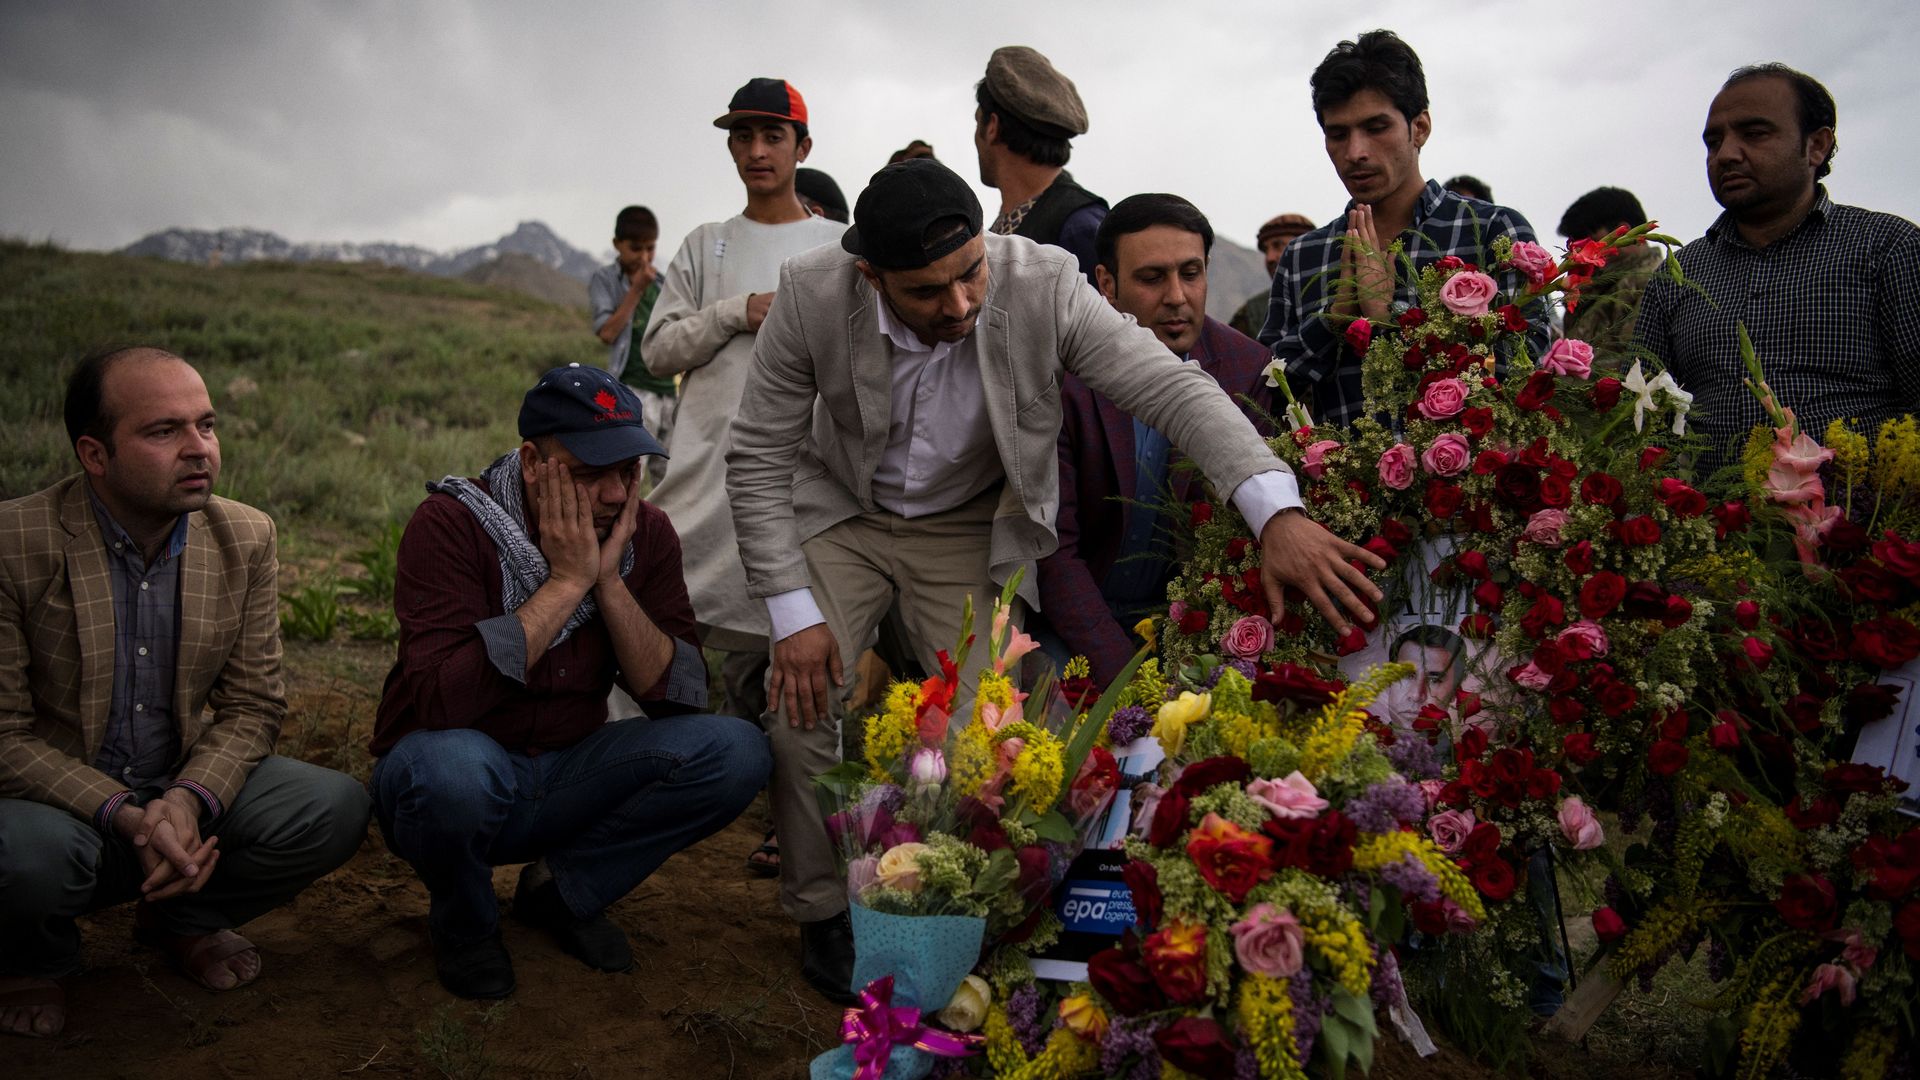 Friends and relatives of Agence France Presse Afghanistan Chief Photographer Shah Marai Faizi gather at his burial in Gul Dara, Kabul on April 30, 2018.